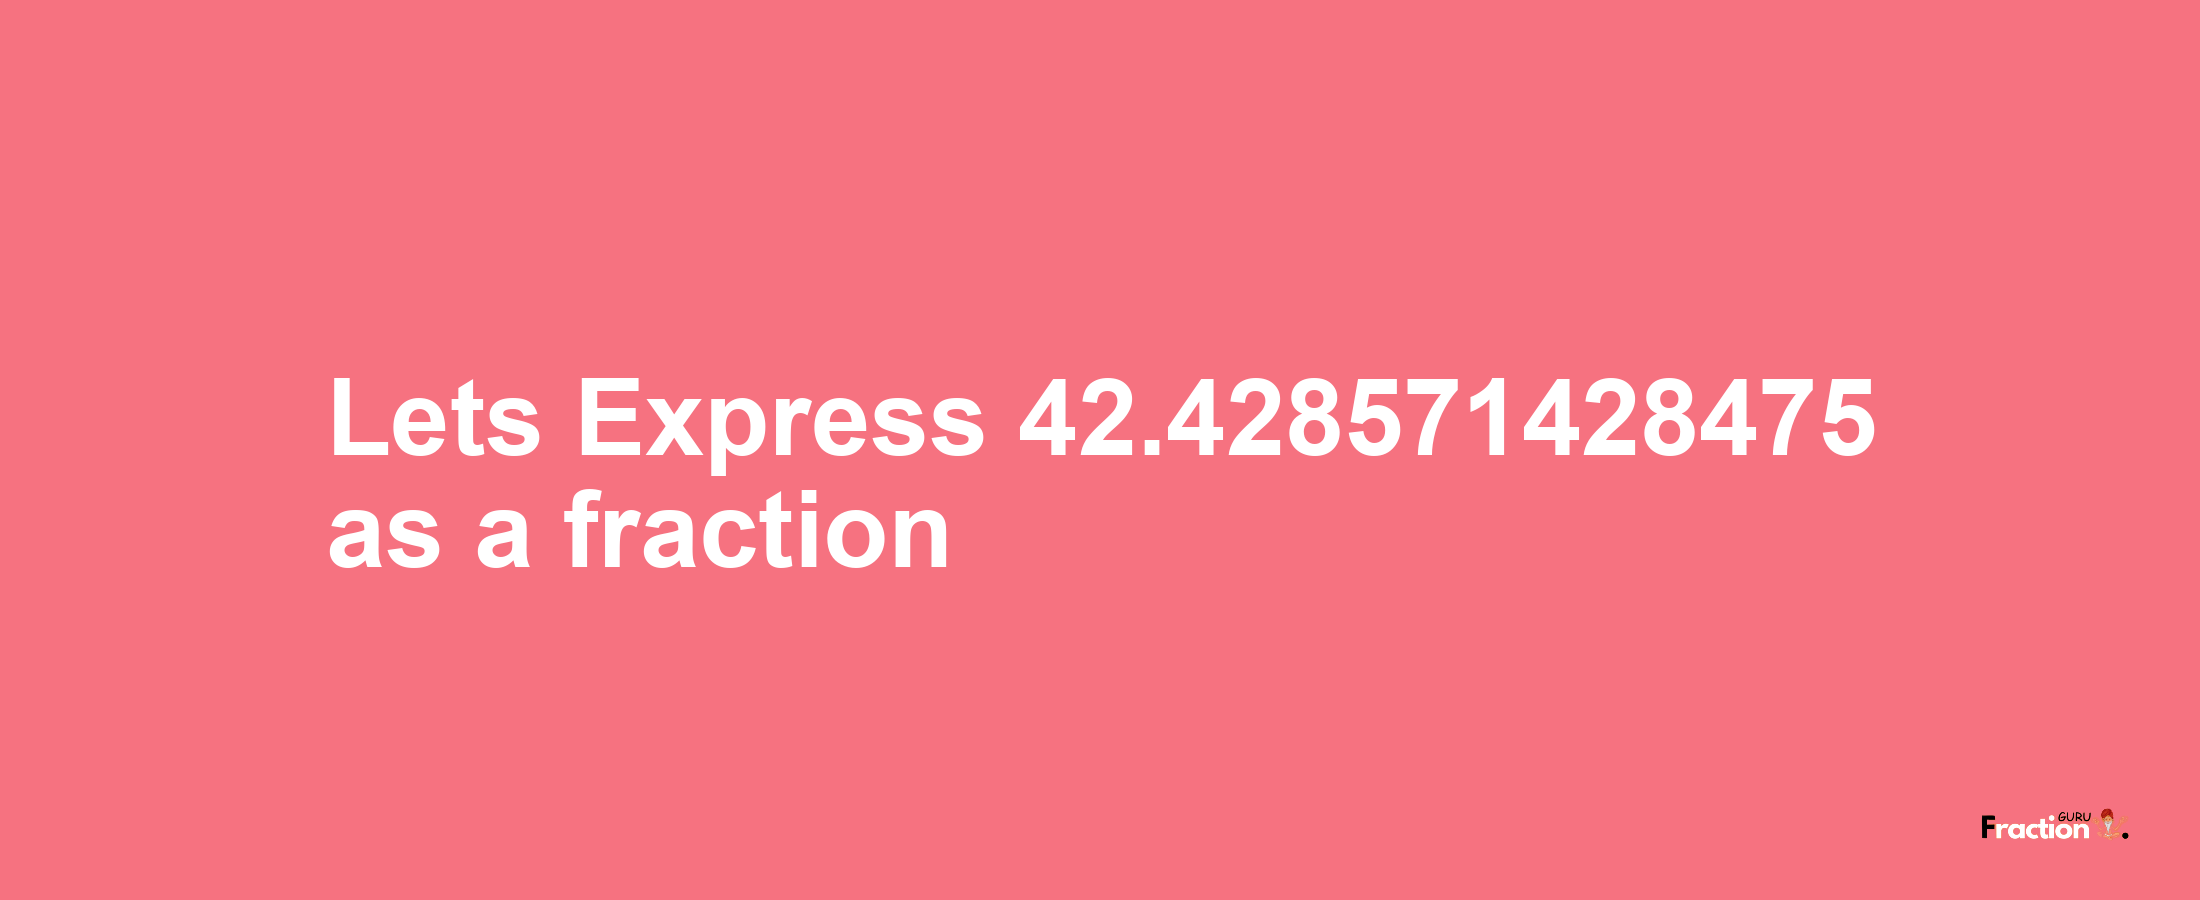 Lets Express 42.428571428475 as afraction